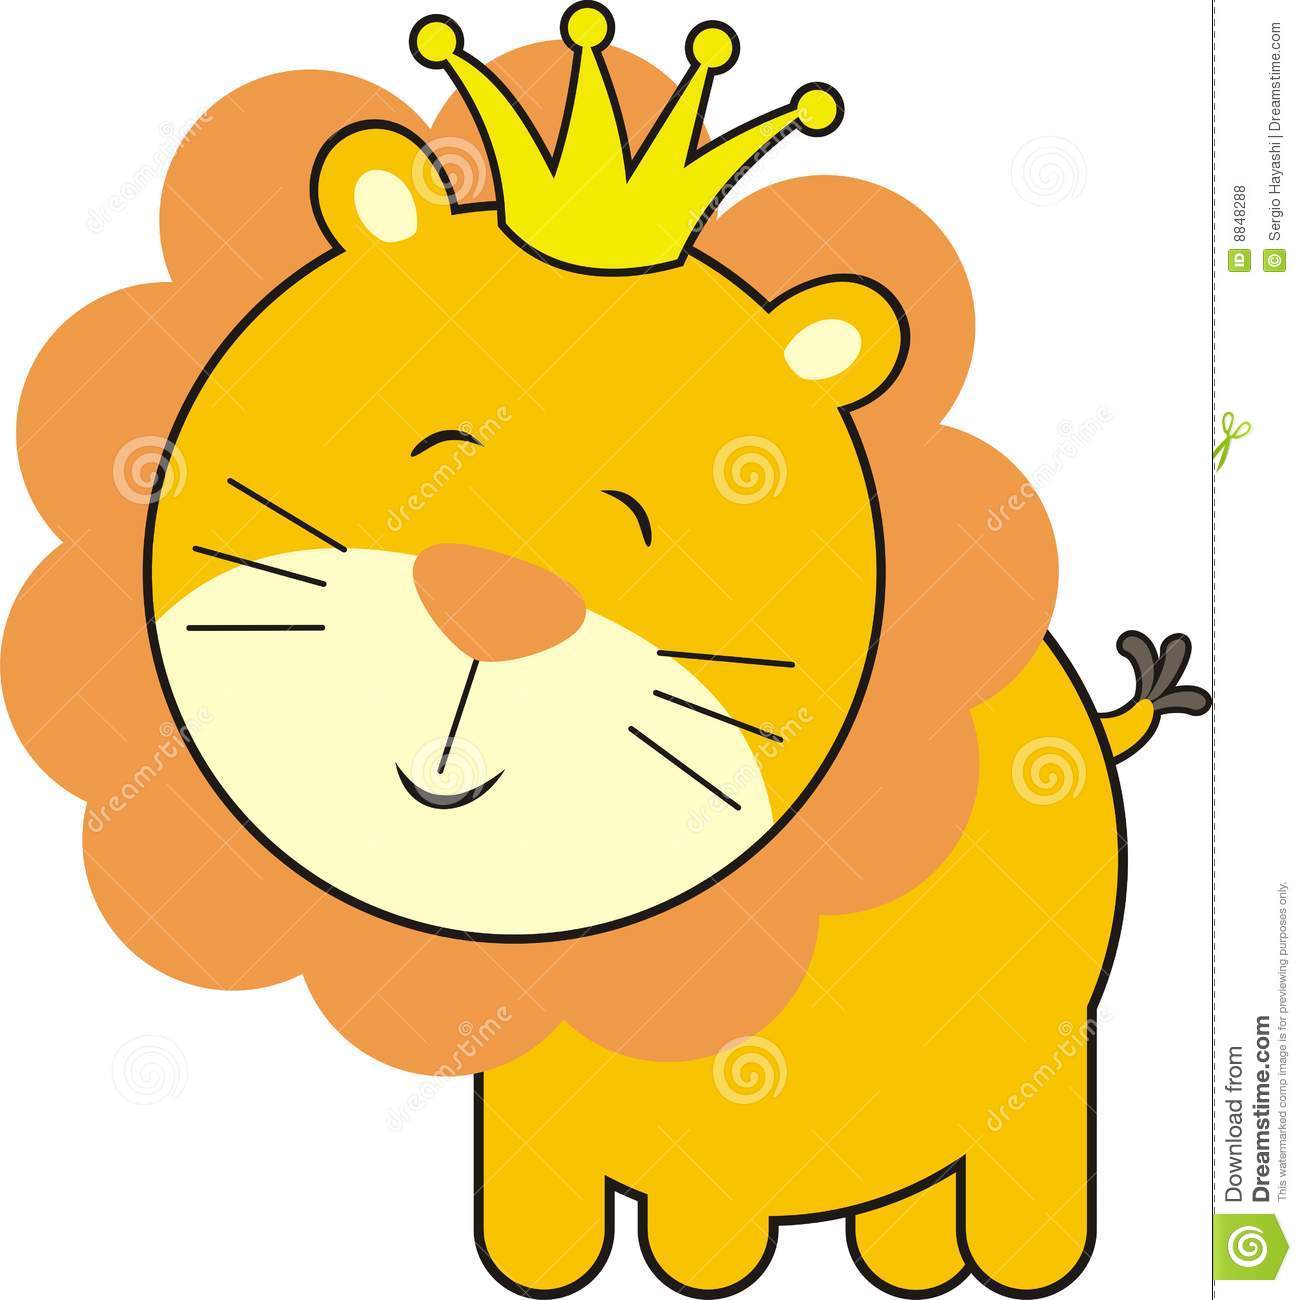 Baby Lion Clipart   Clipart Panda   Free Clipart Images